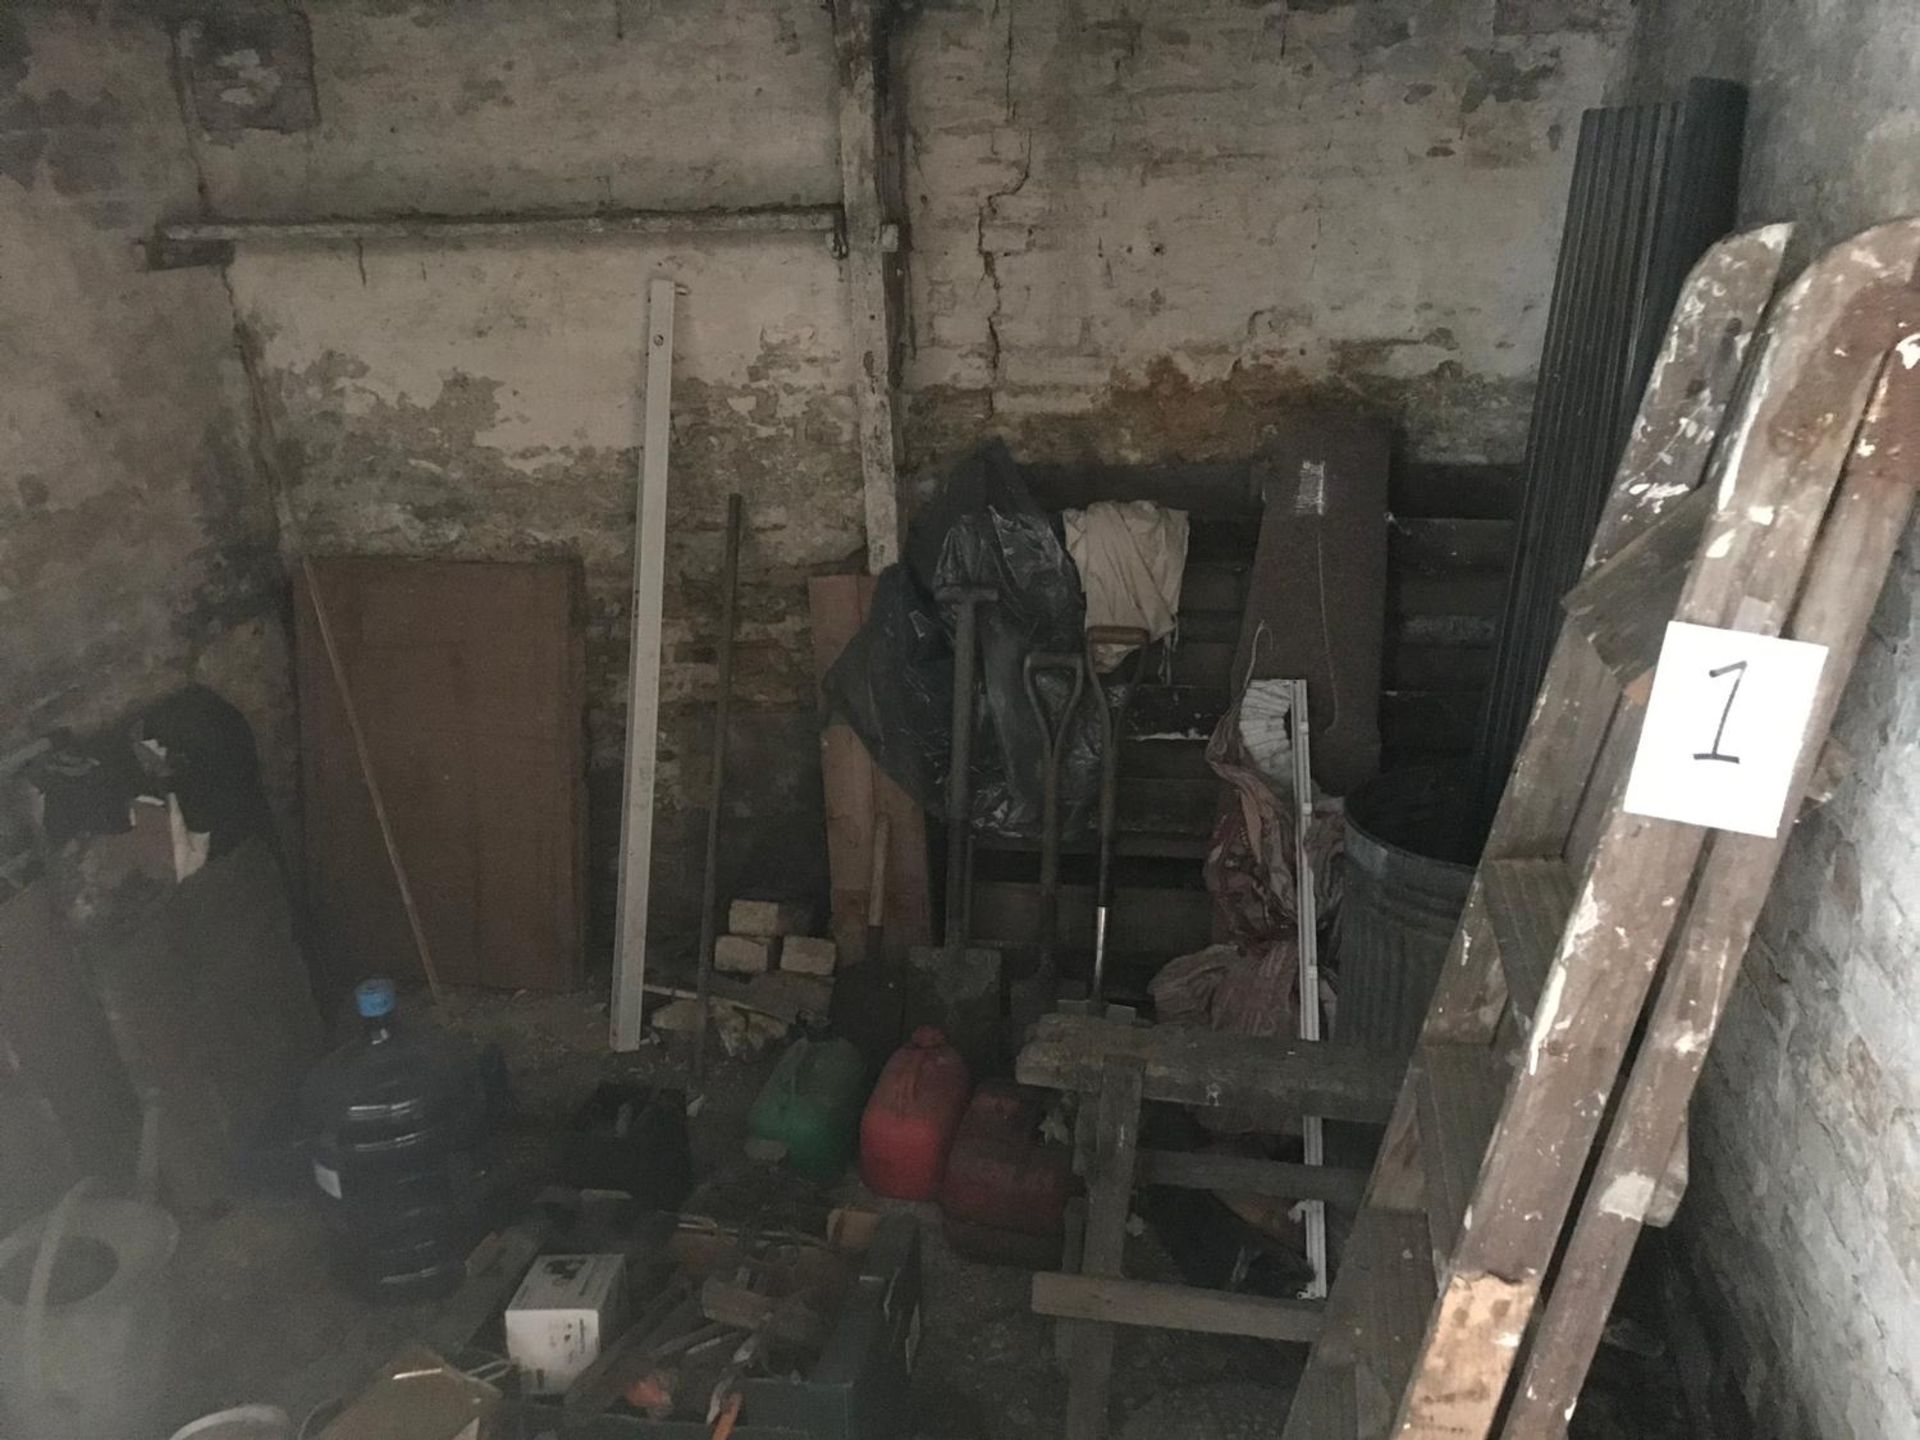 Entire contents of Room One, including spades, saw horse, buckets etc.